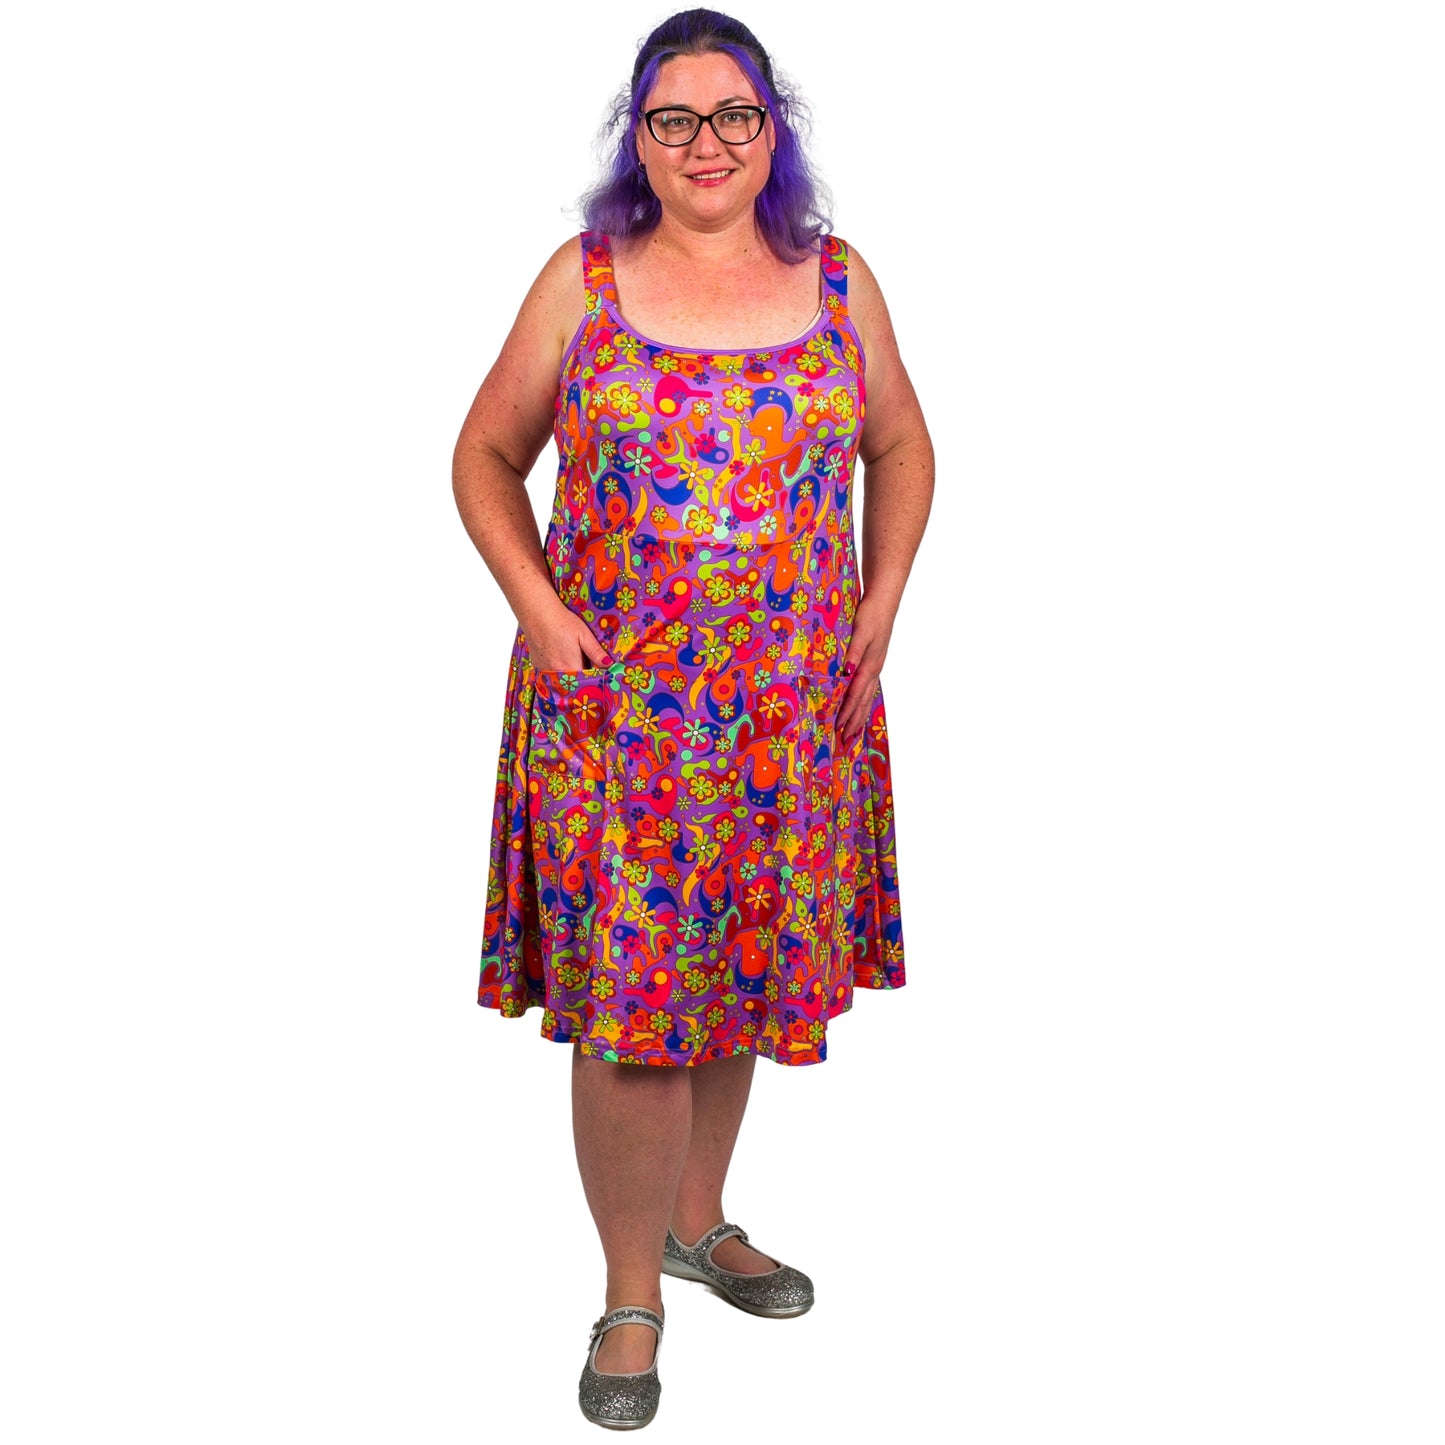 Flower Power Pinafore by RainbowsAndFairies.com.au (Psychedelic - Woodstock - Dress With Pockets - Vintage Inspired - Kitsch) - SKU: CL_PFORE_FLOPO_ORG - Pic-02